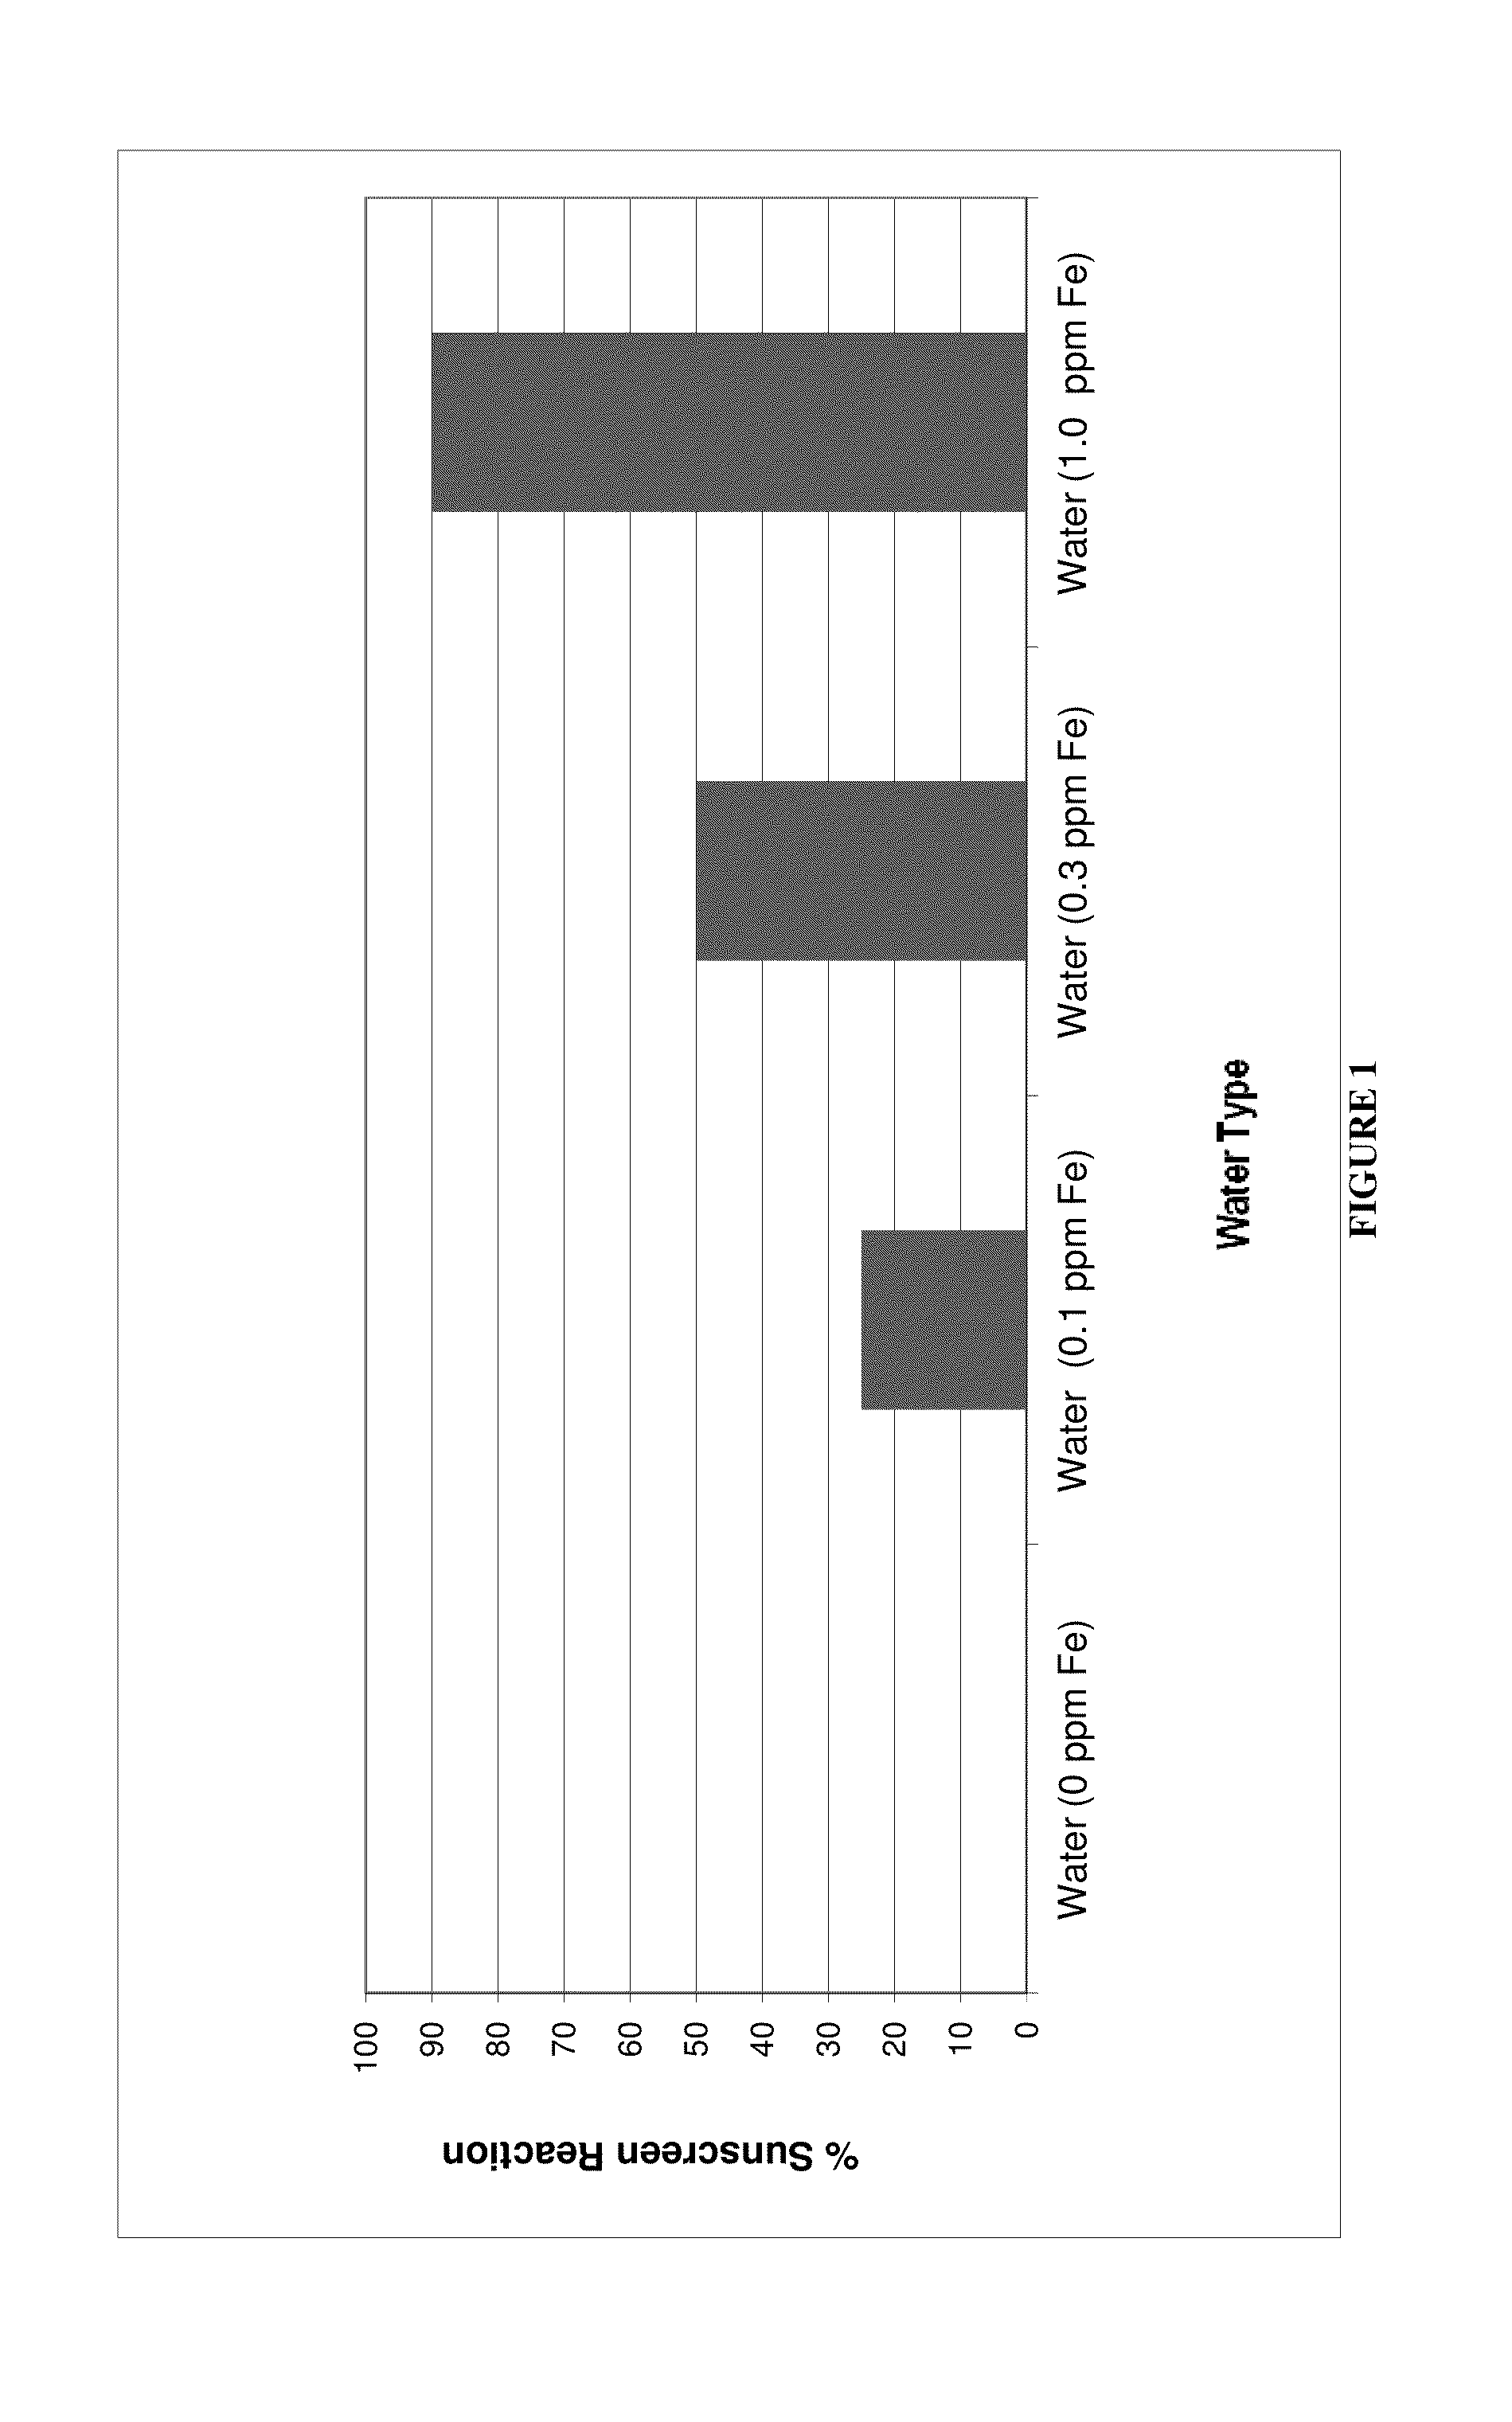 Cleaning composition and method for removal of sunscreen stains